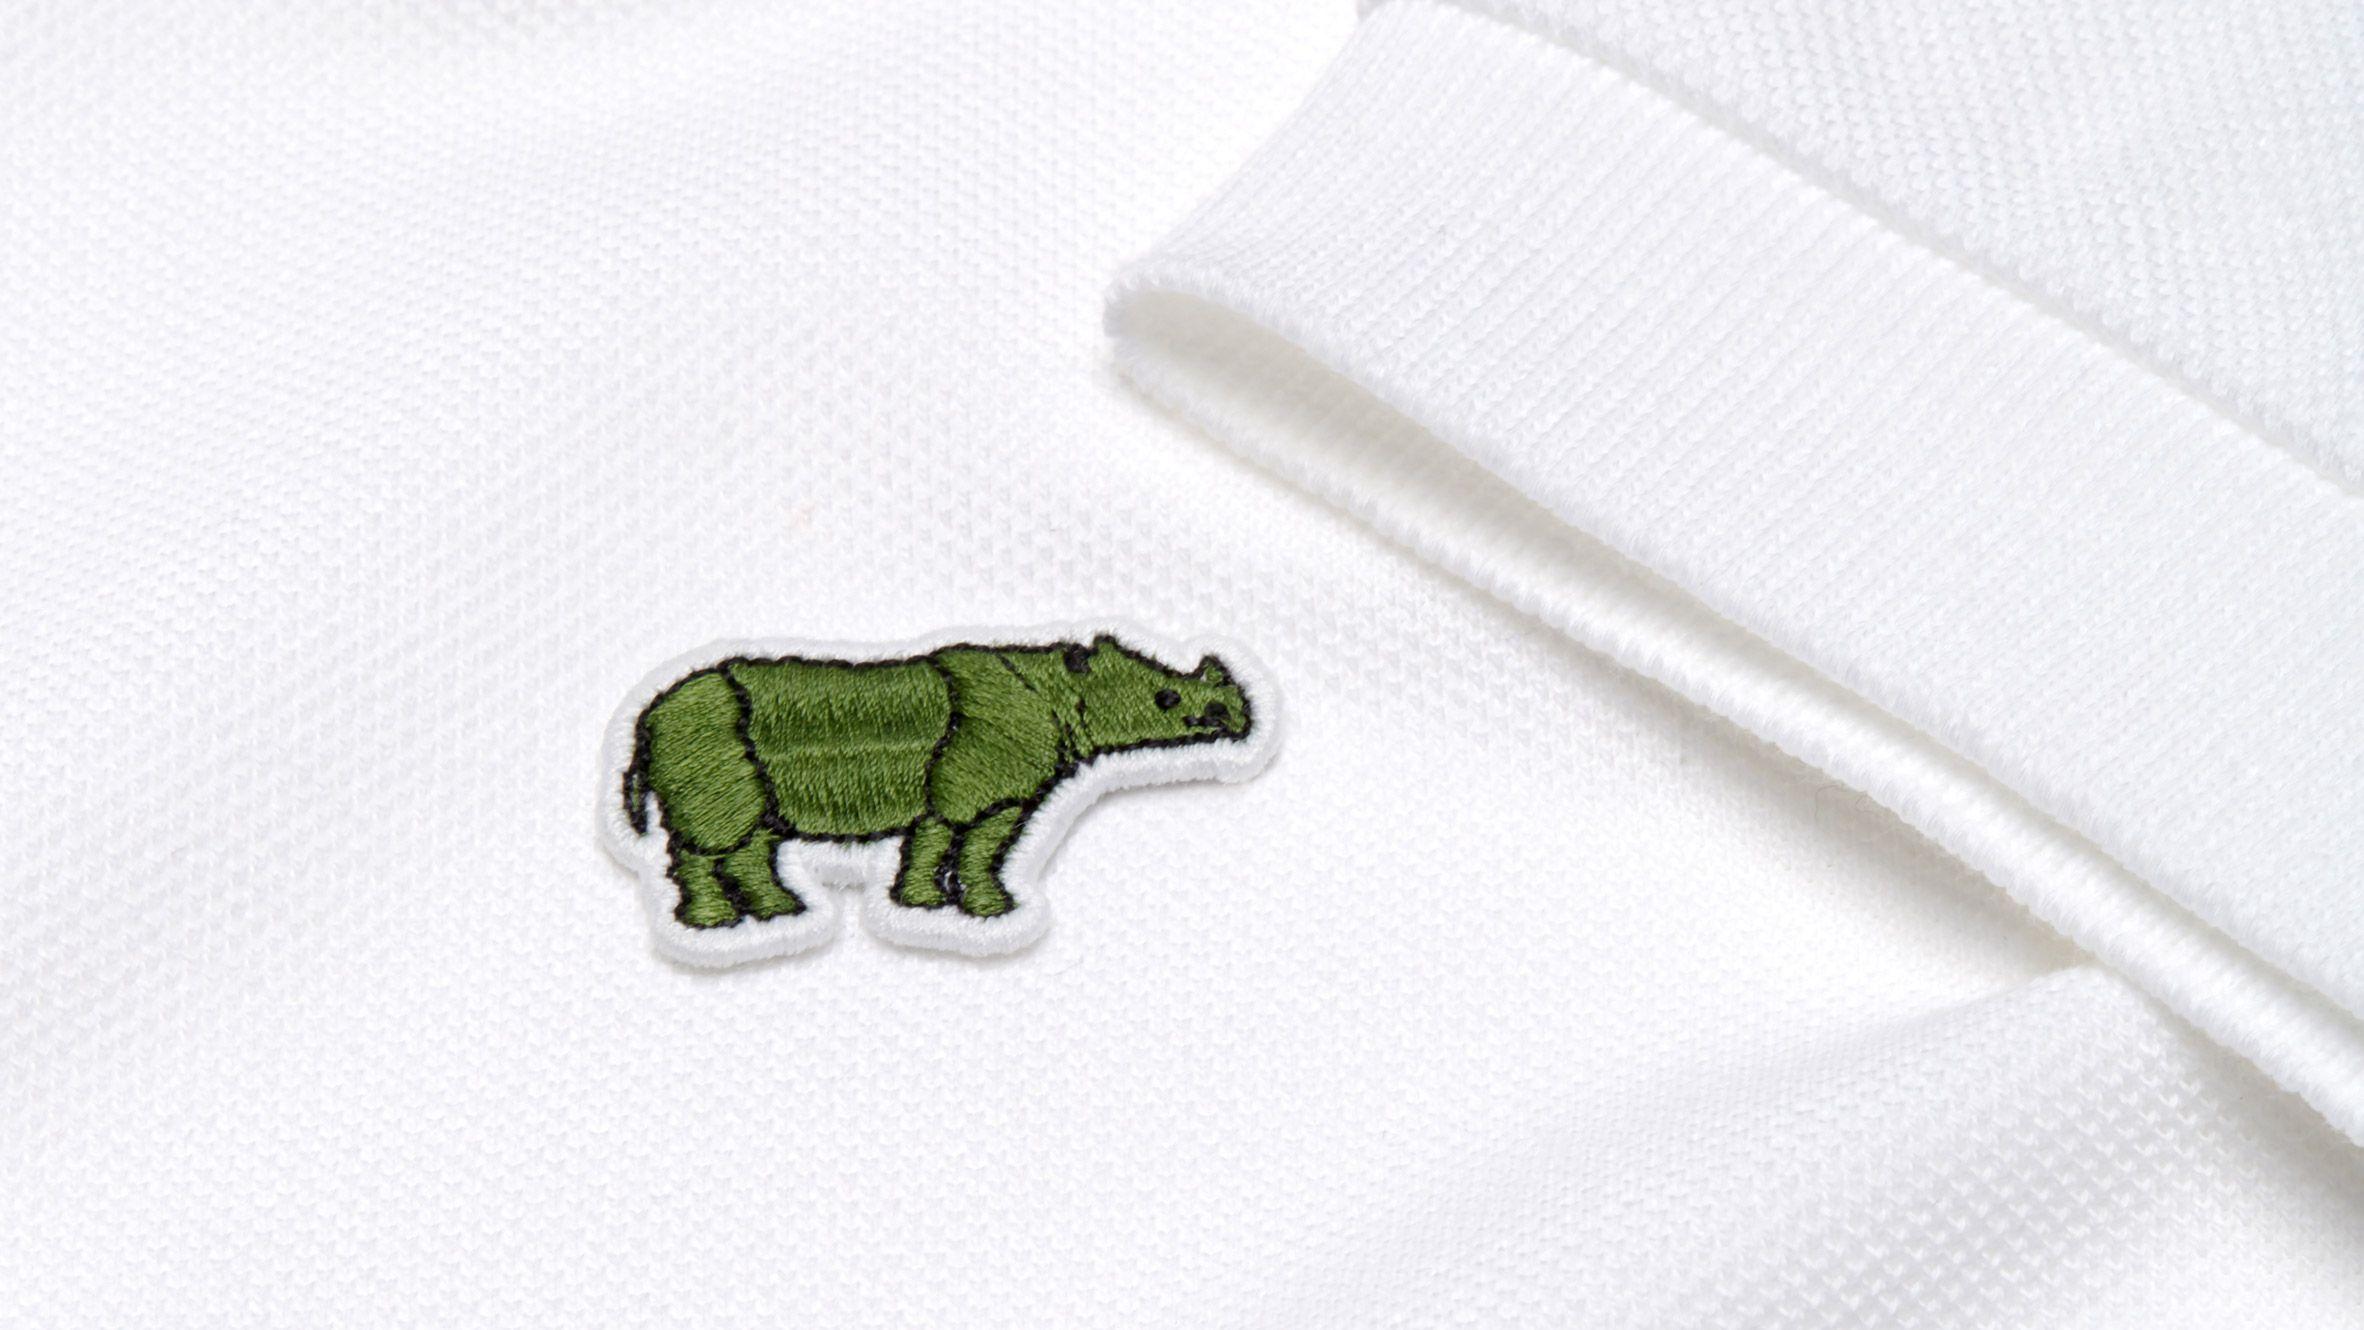 Lacoste Logo - Lacoste crocodile logo replaced by endangered species